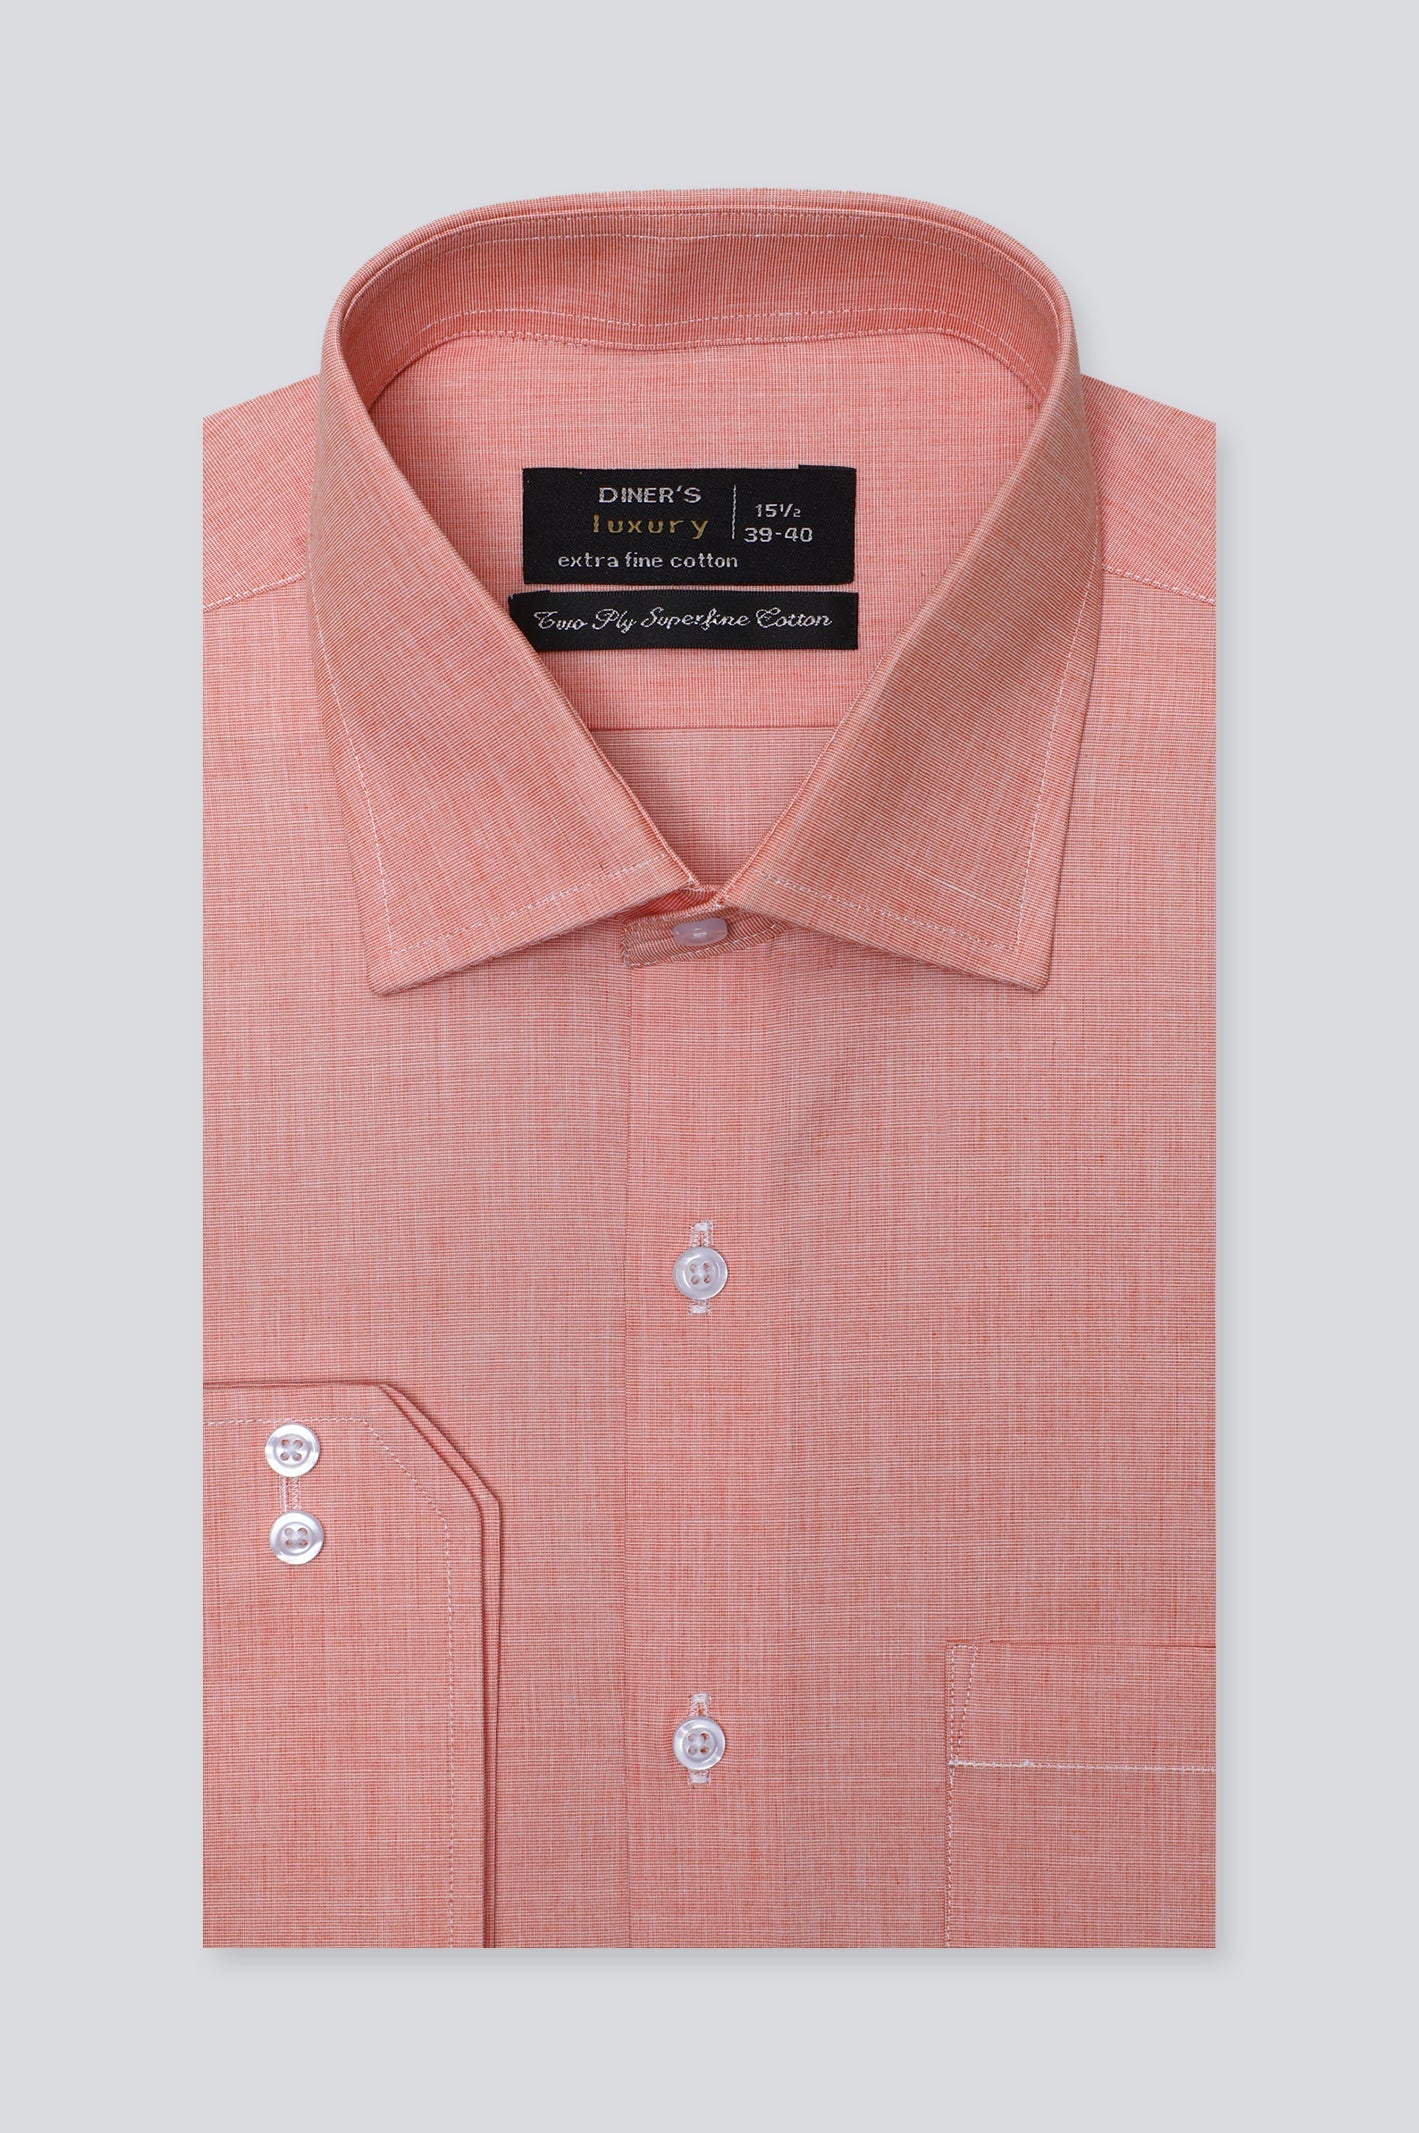 Peach Texture Formal Shirt For Men - Diners